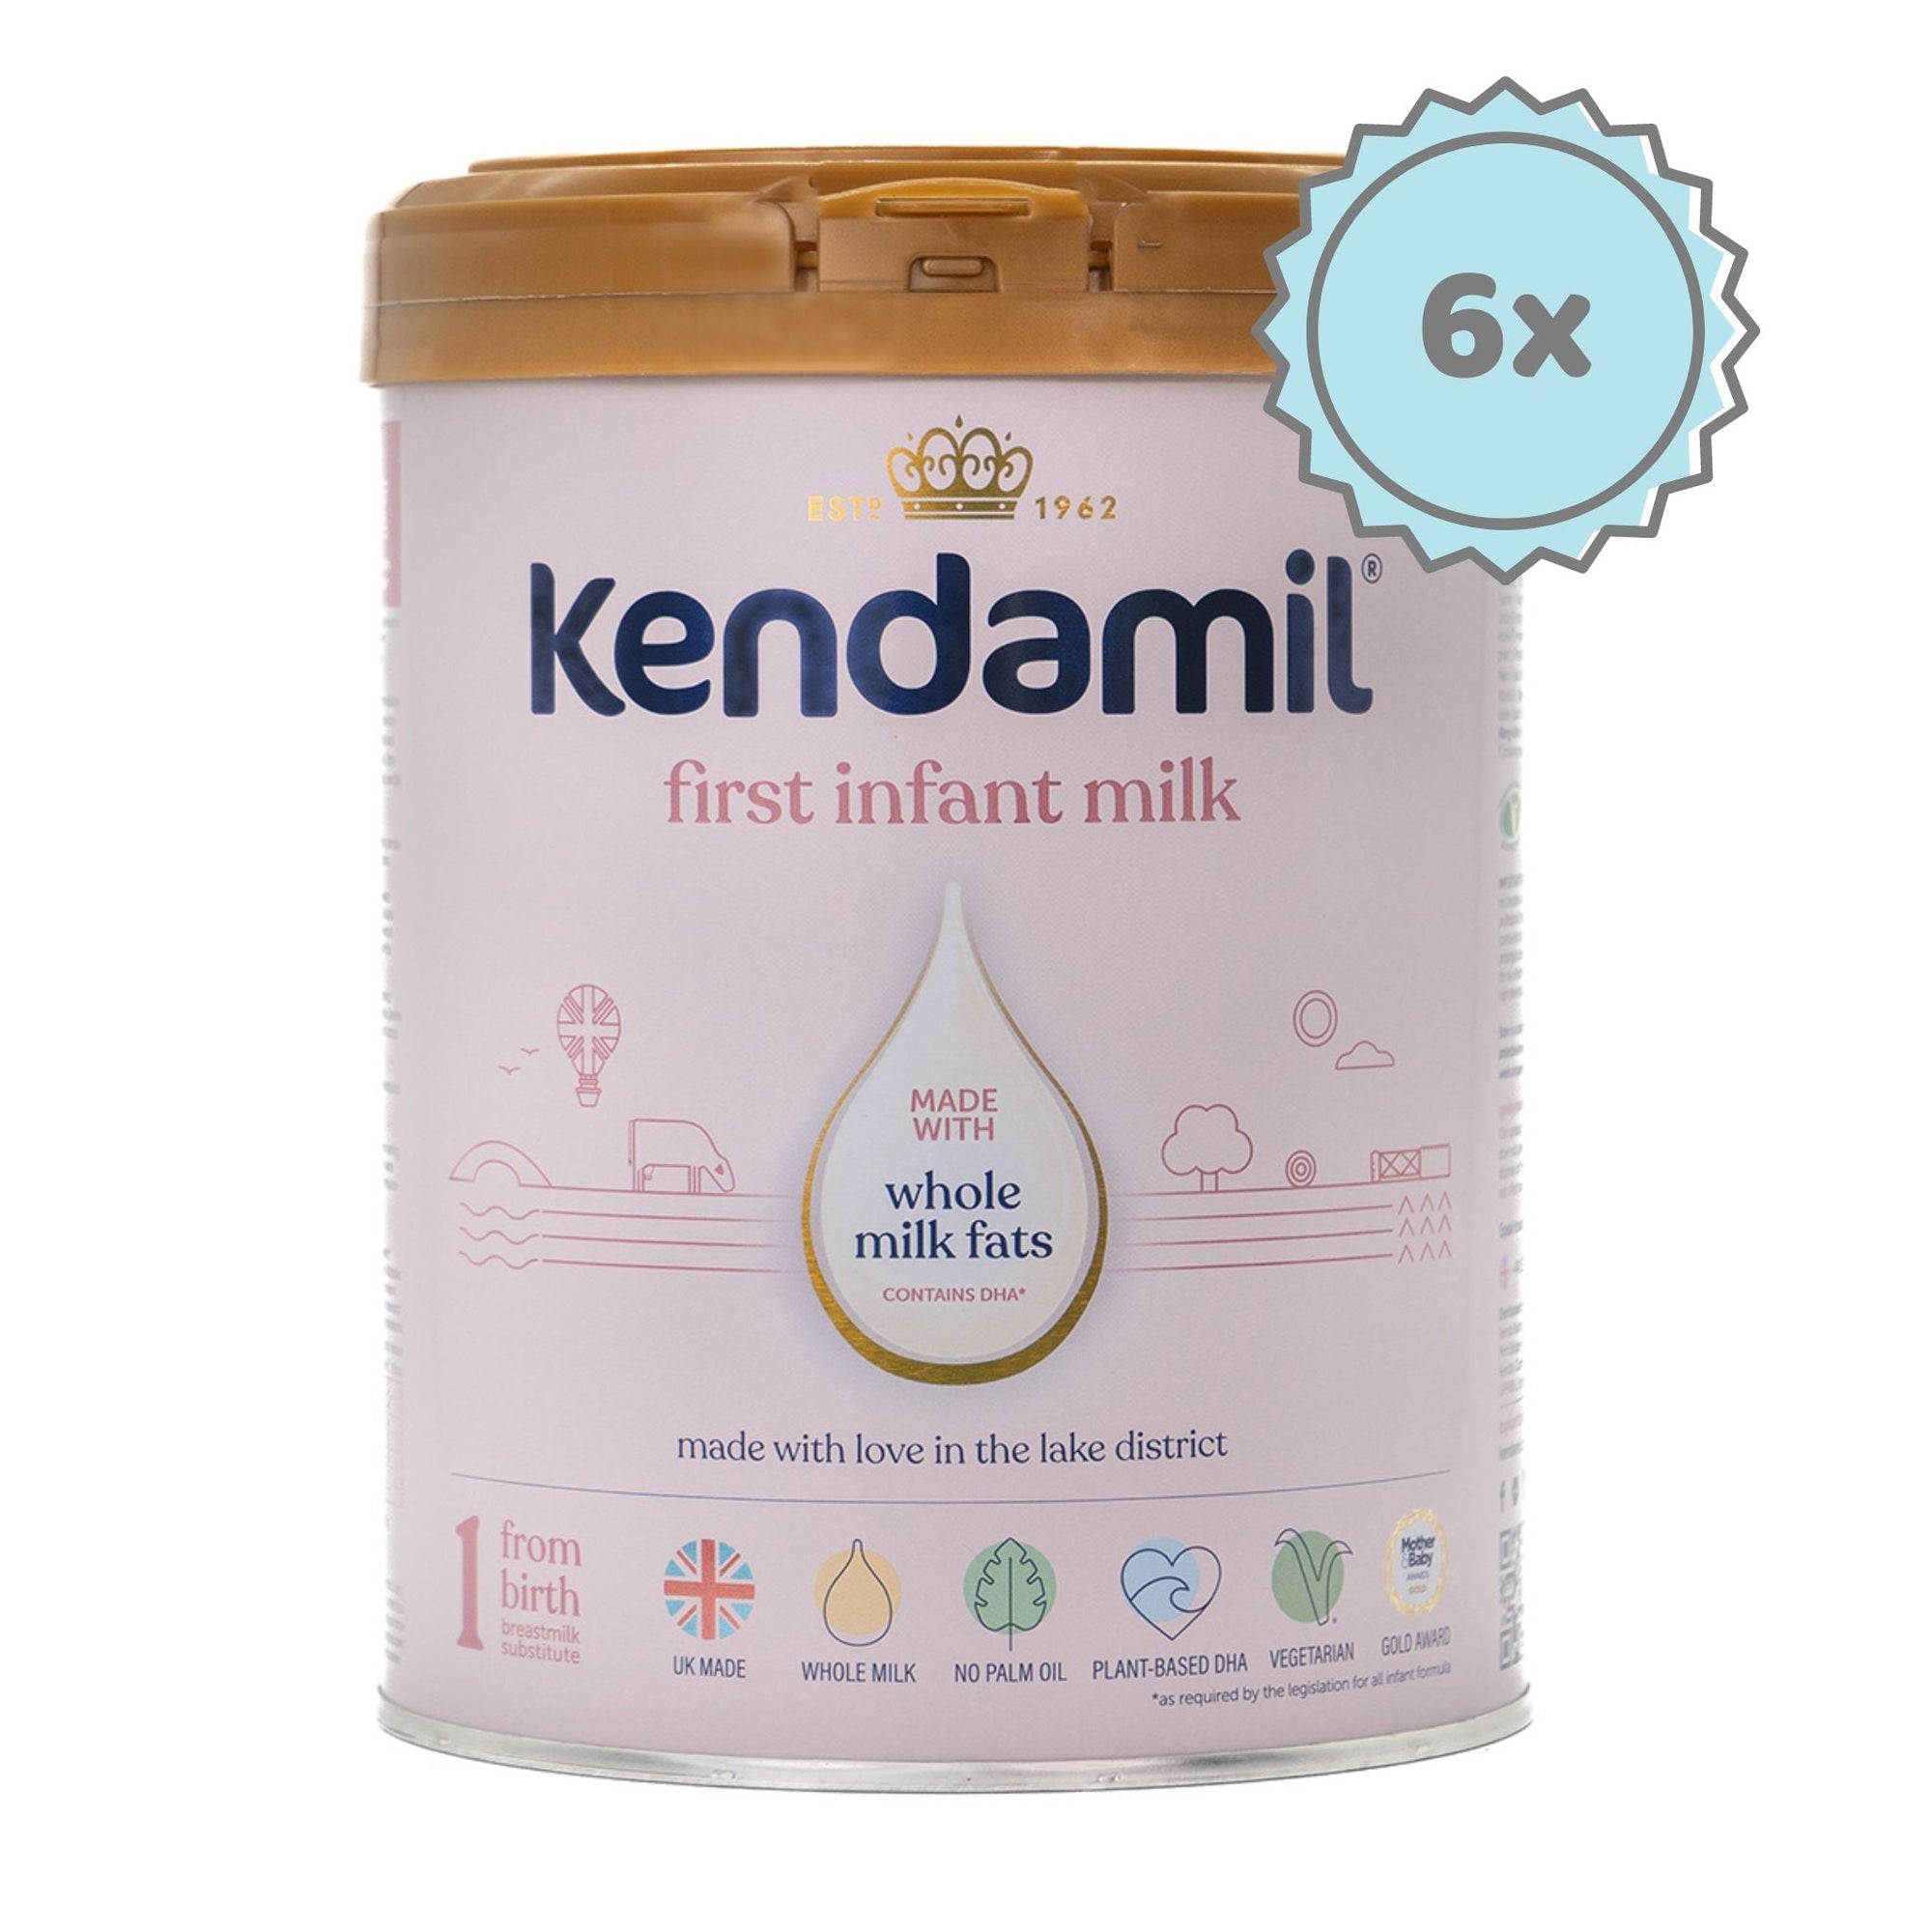 Kendamil Classic First Infant Milk Formula Stage 1 | Organic European Baby Formula | 6 cans